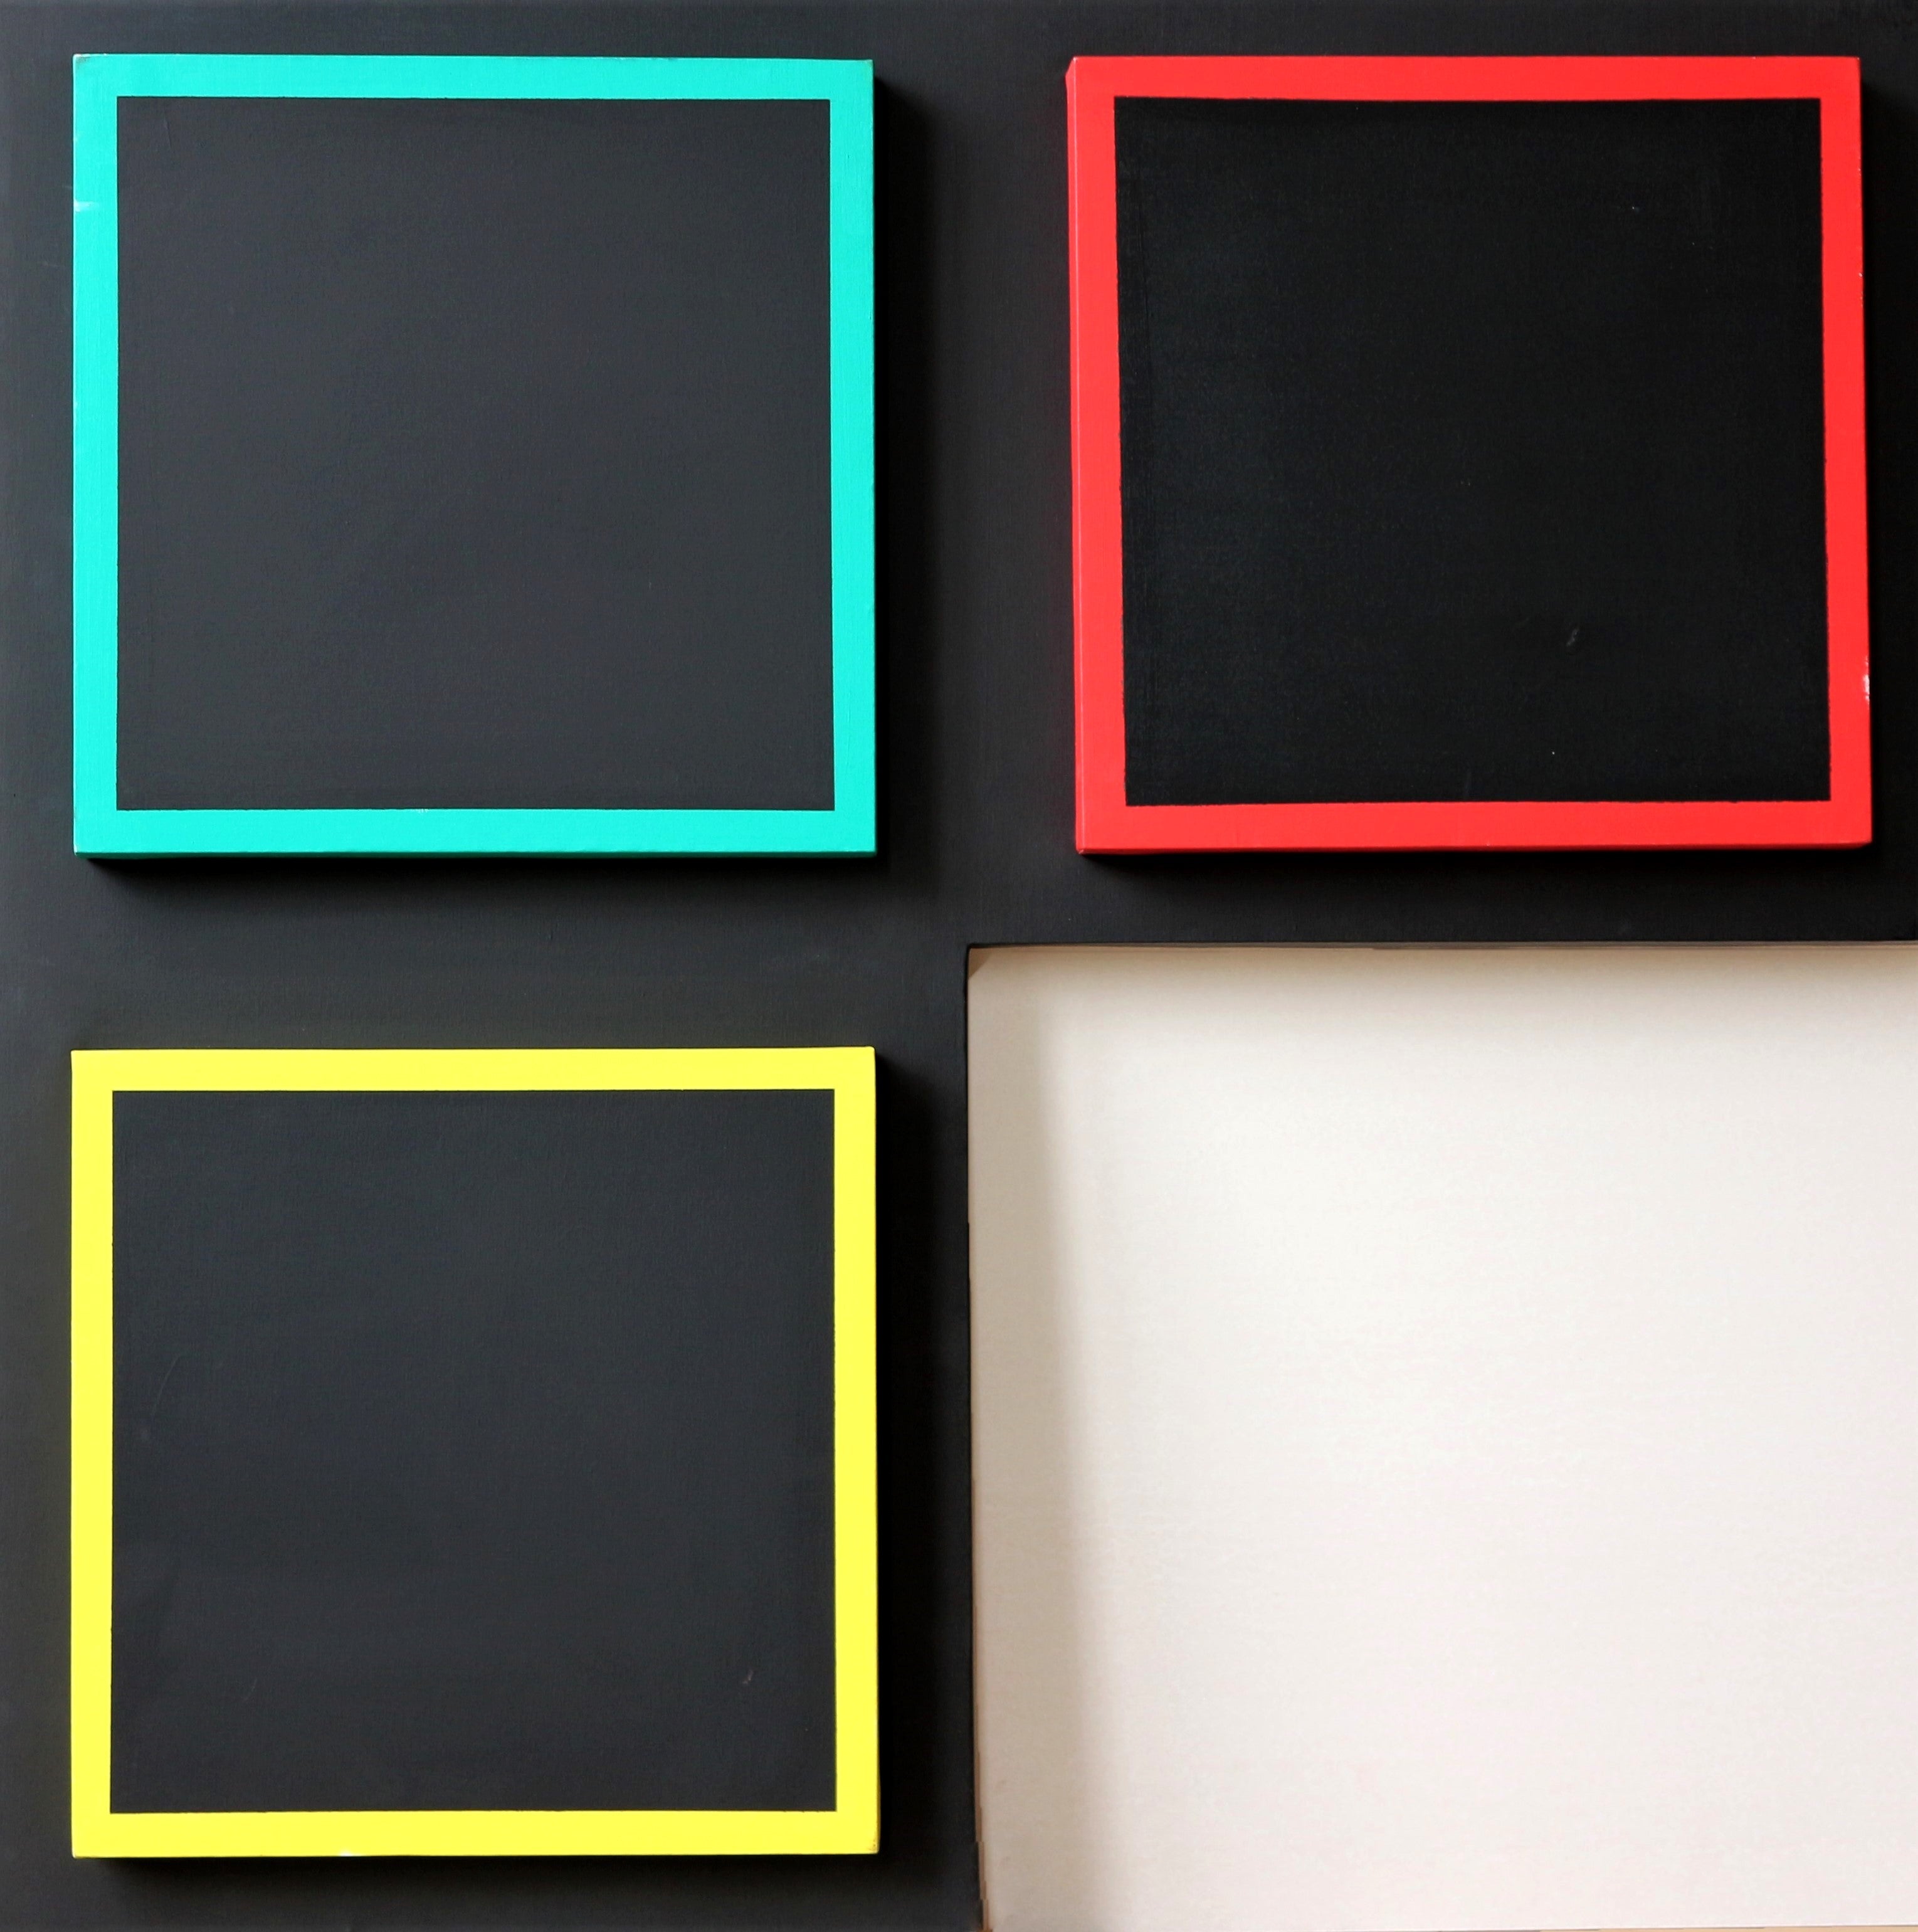 “3 Carrés 2” (3 Squares 2) by Joel Froment  (French, Born in 1938)  Circa 1985